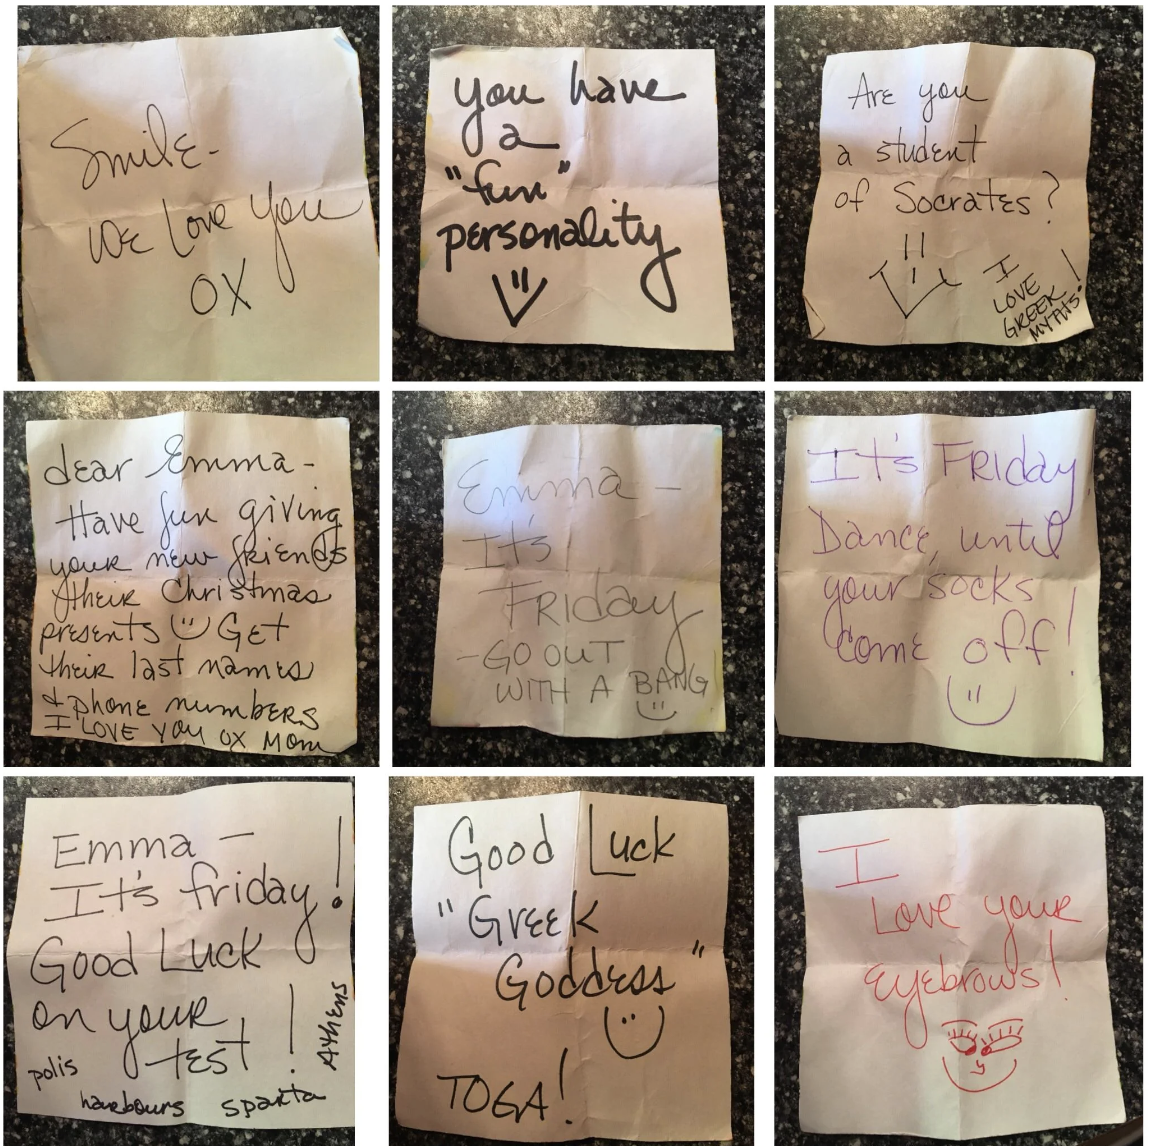 Nine sticky notes with encouraging messages for someone named Emma, ranging from love expressions to good luck wishes